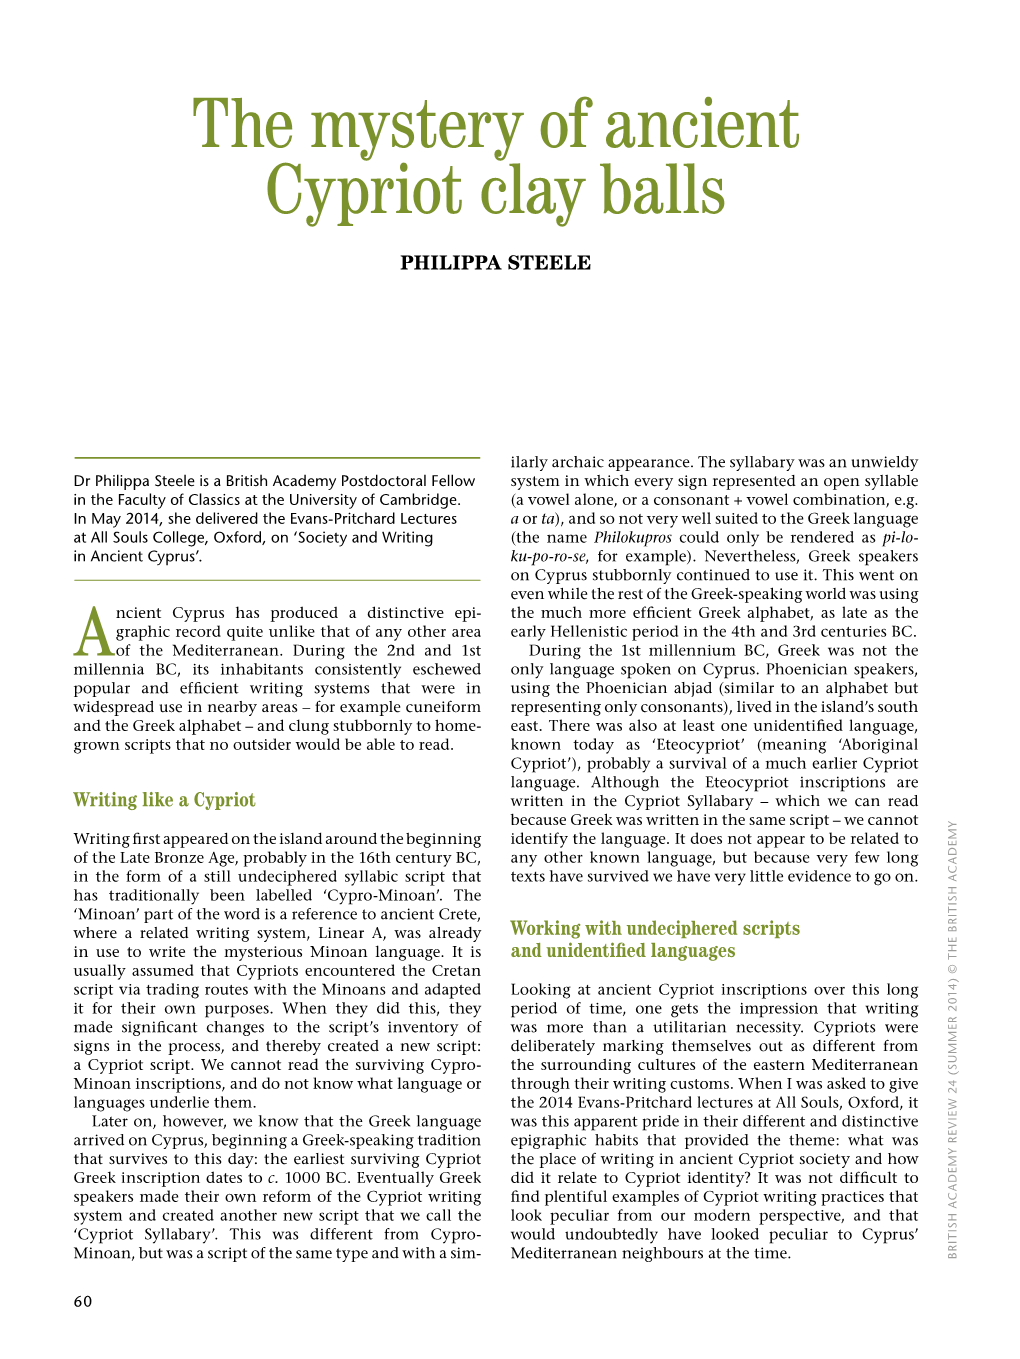 The Mystery of Ancient Cypriot Clay Balls